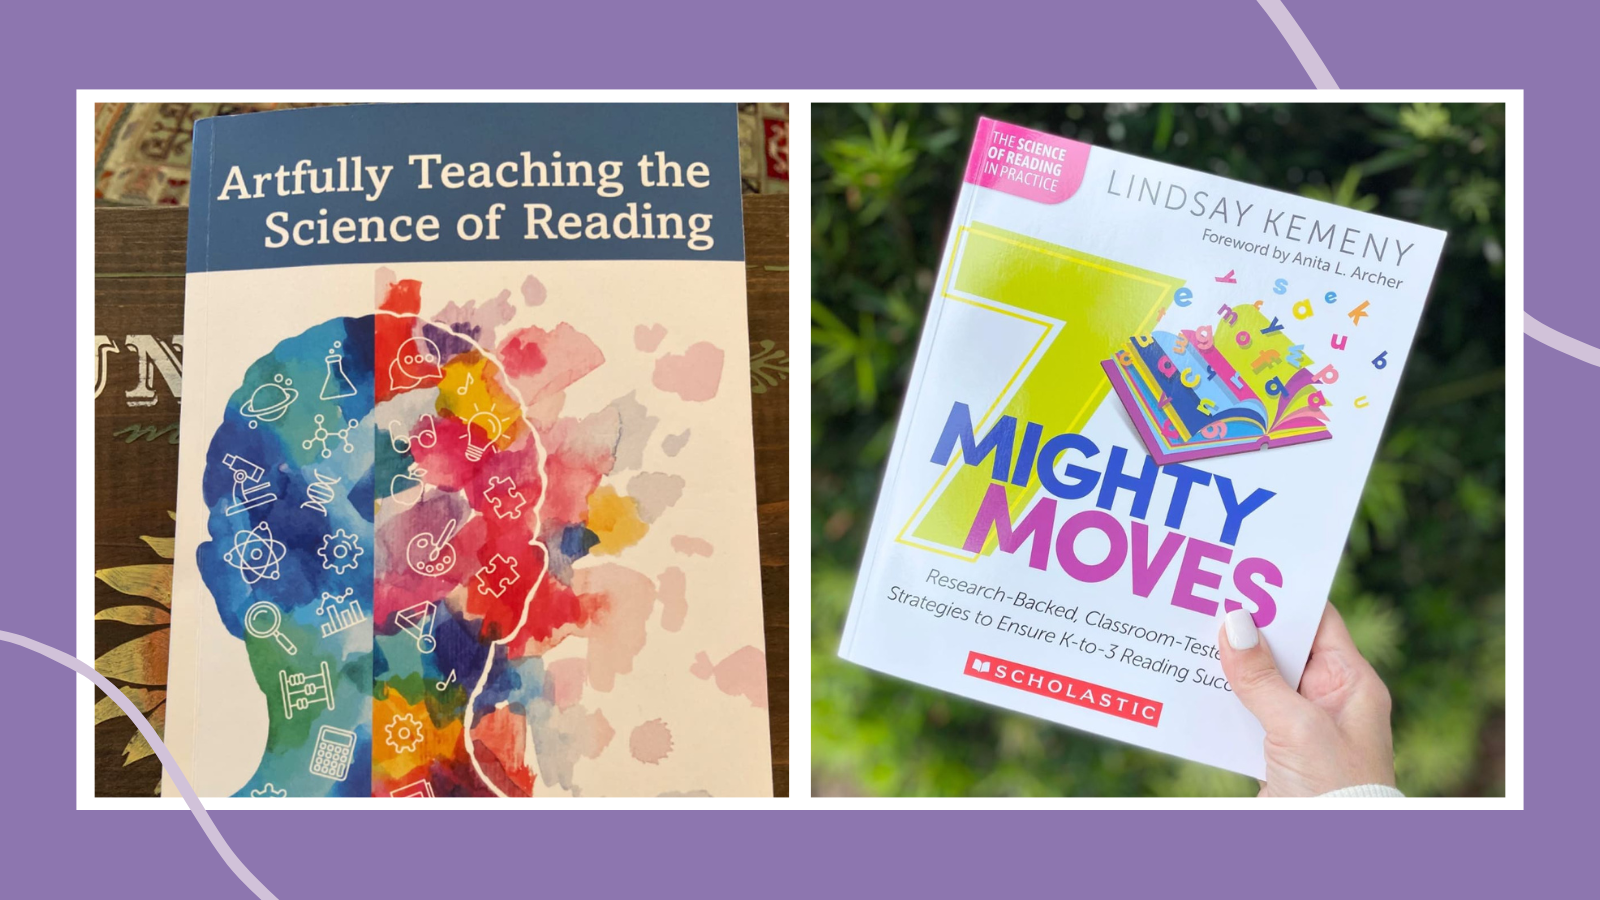 Two science of reading PD books Artfully Teaching the Science of Reading and 7 Mighty Moves.